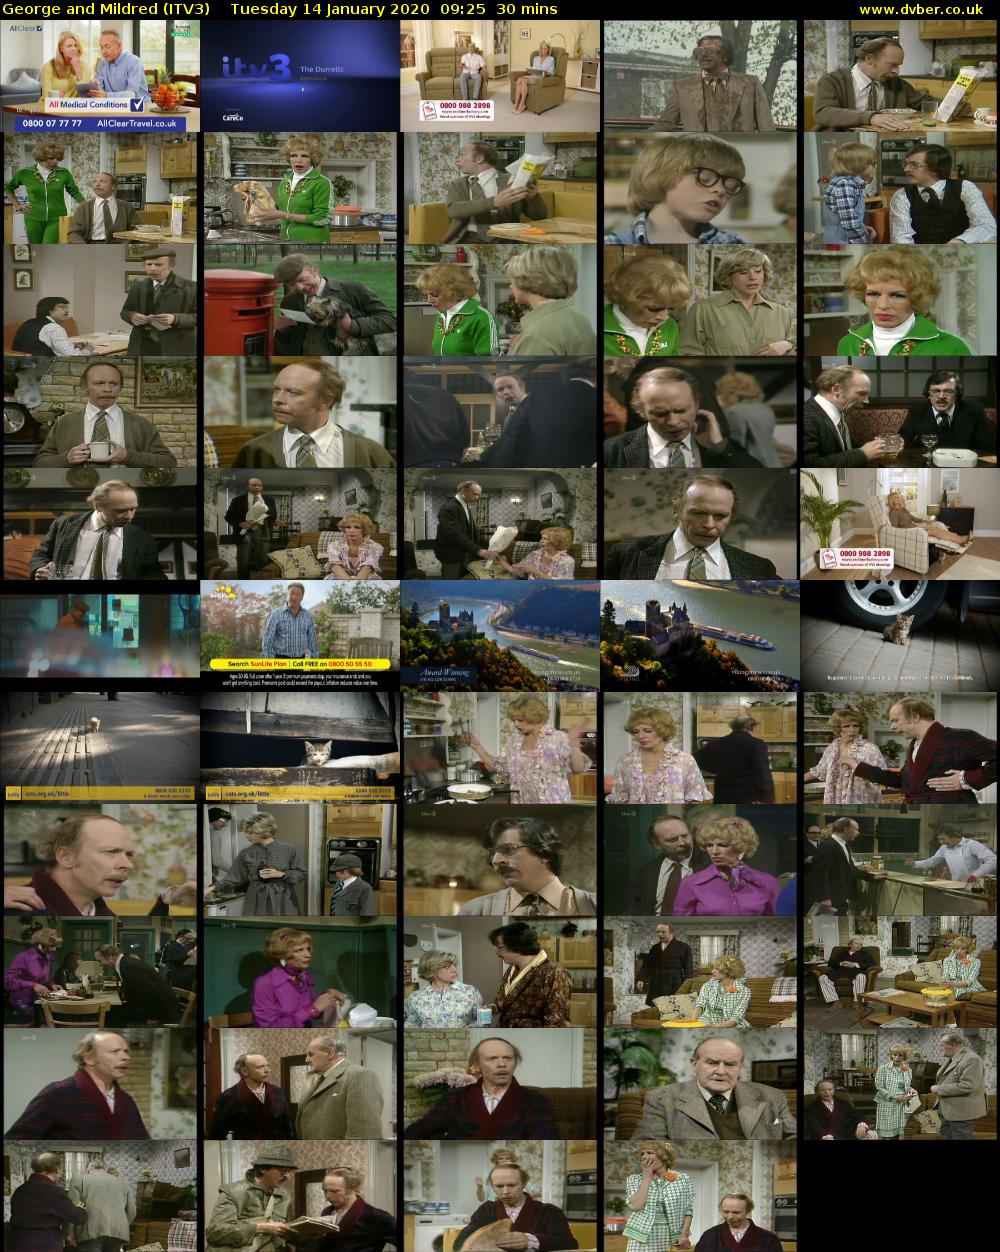 George and Mildred (ITV3) Tuesday 14 January 2020 09:25 - 09:55